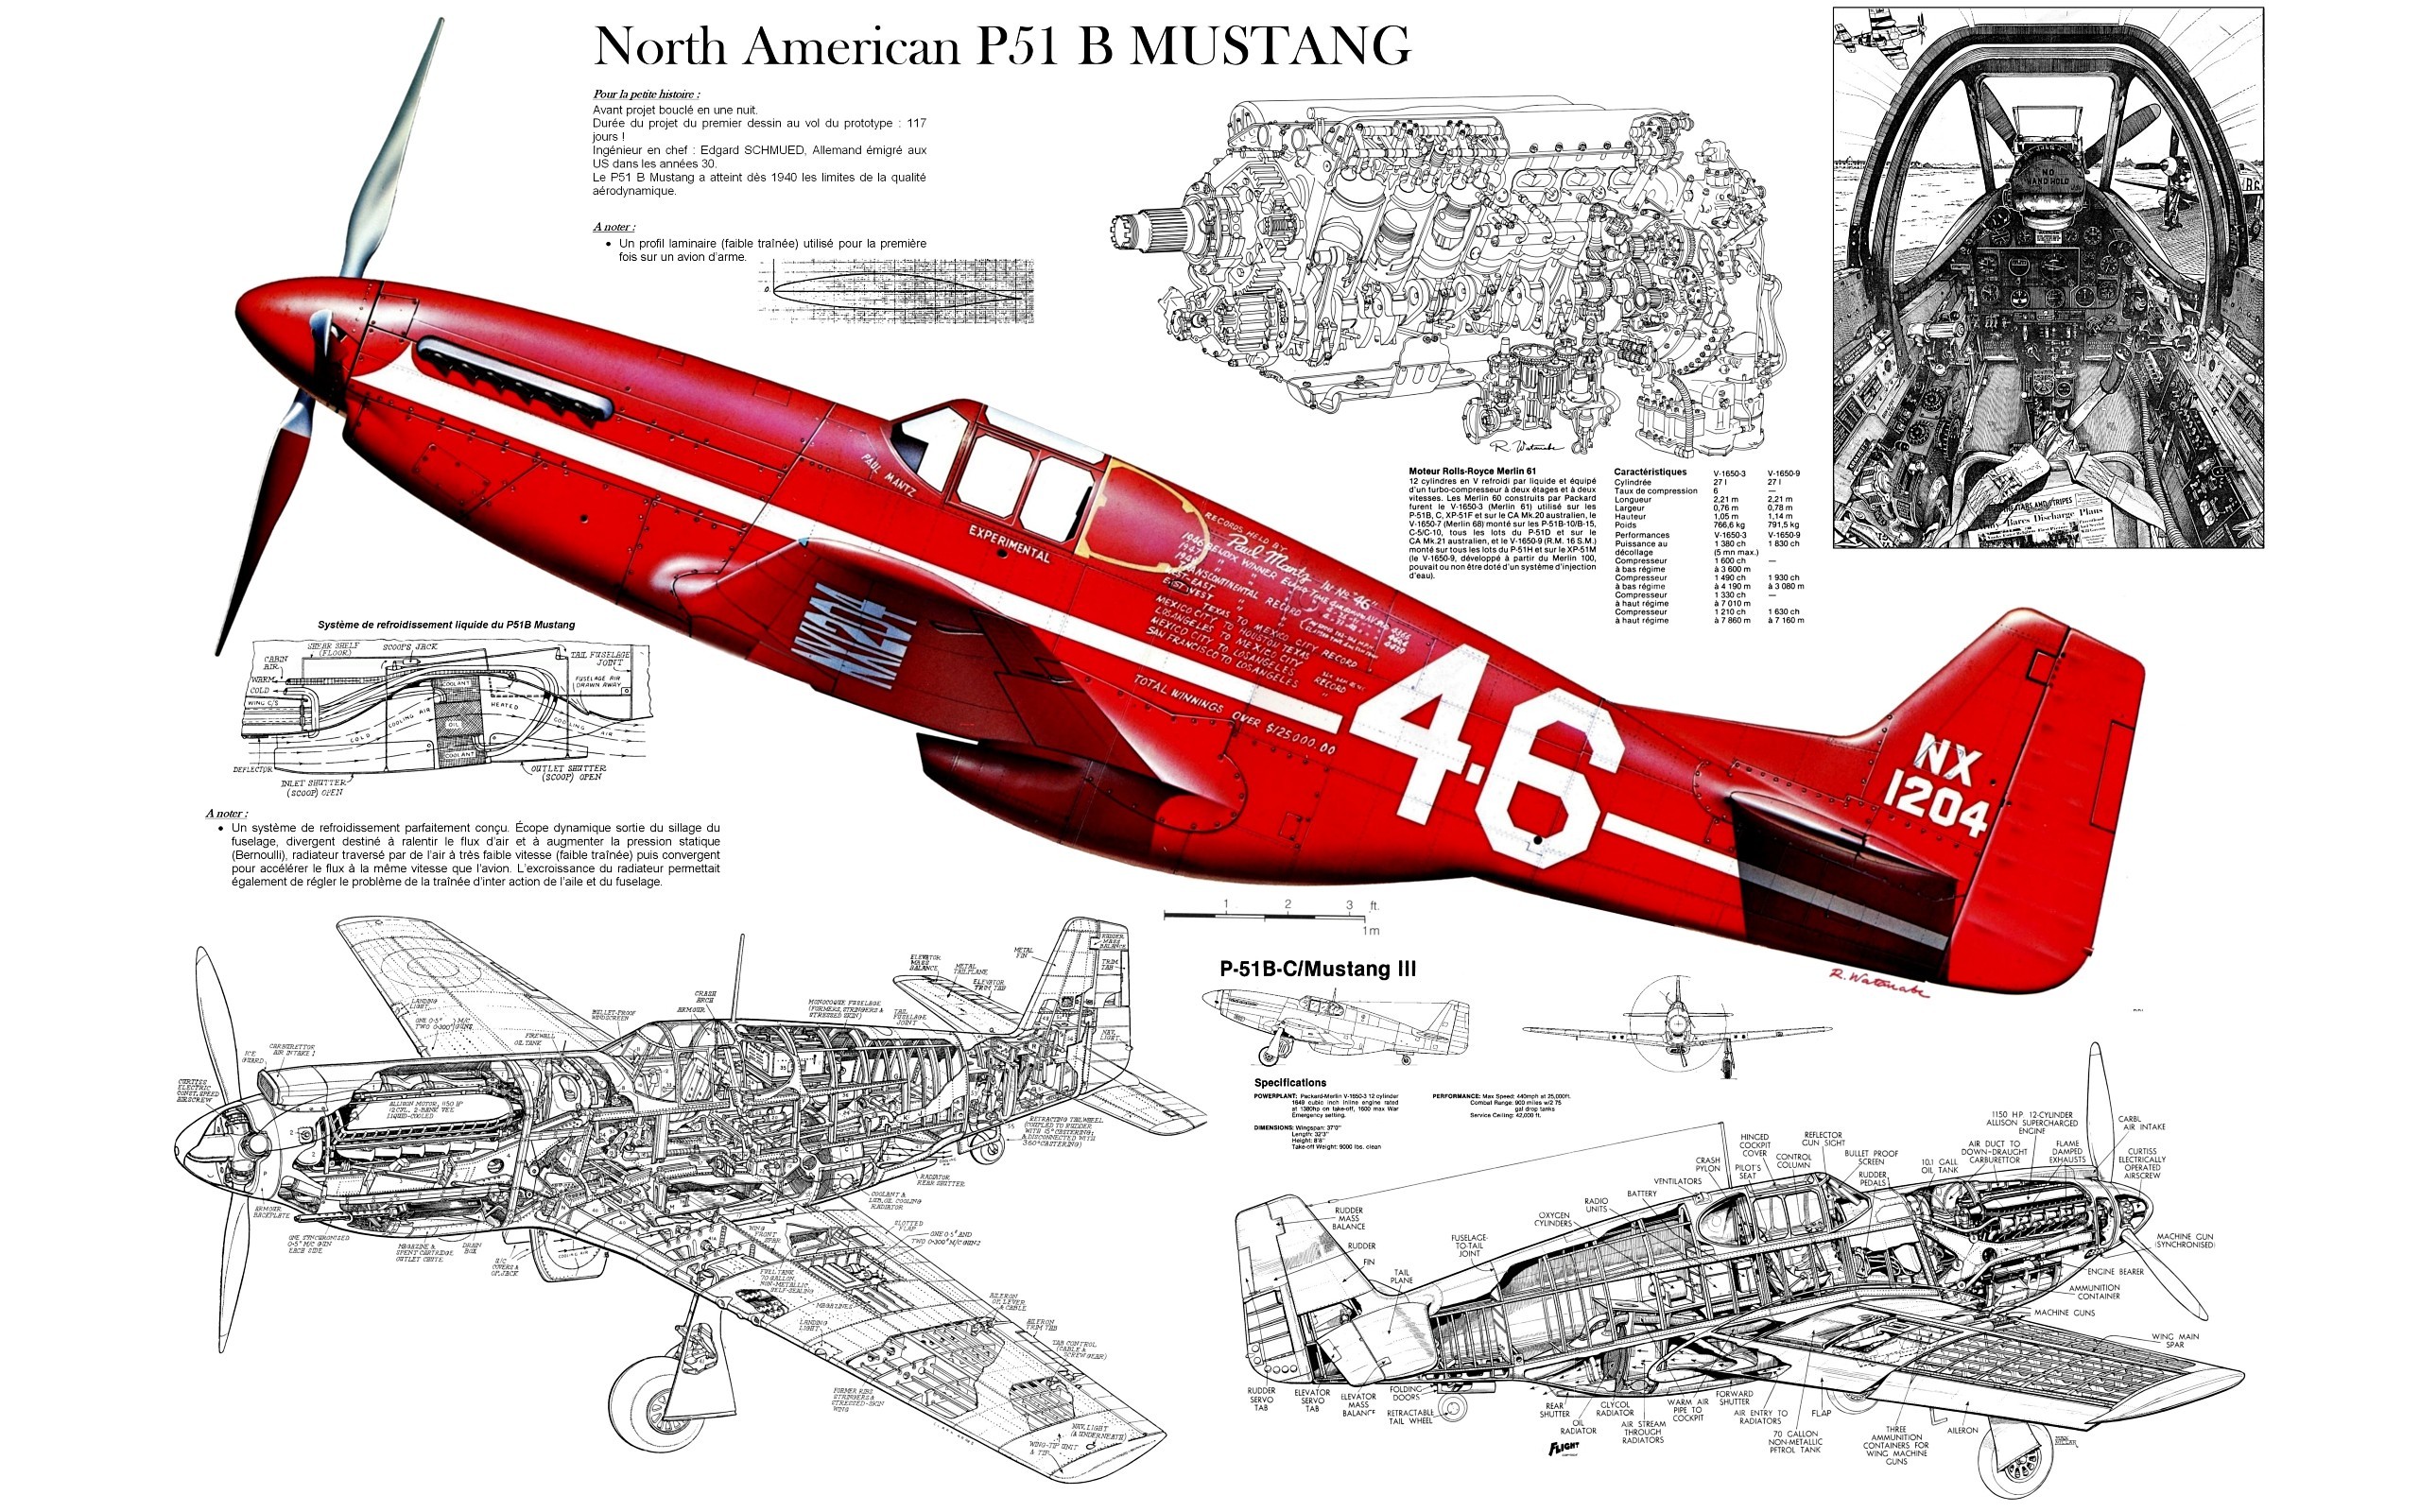 General 2560x1600 digital art North American P-51 Mustang sketches airplane cockpit aircraft blueprints numbers vehicle schematic